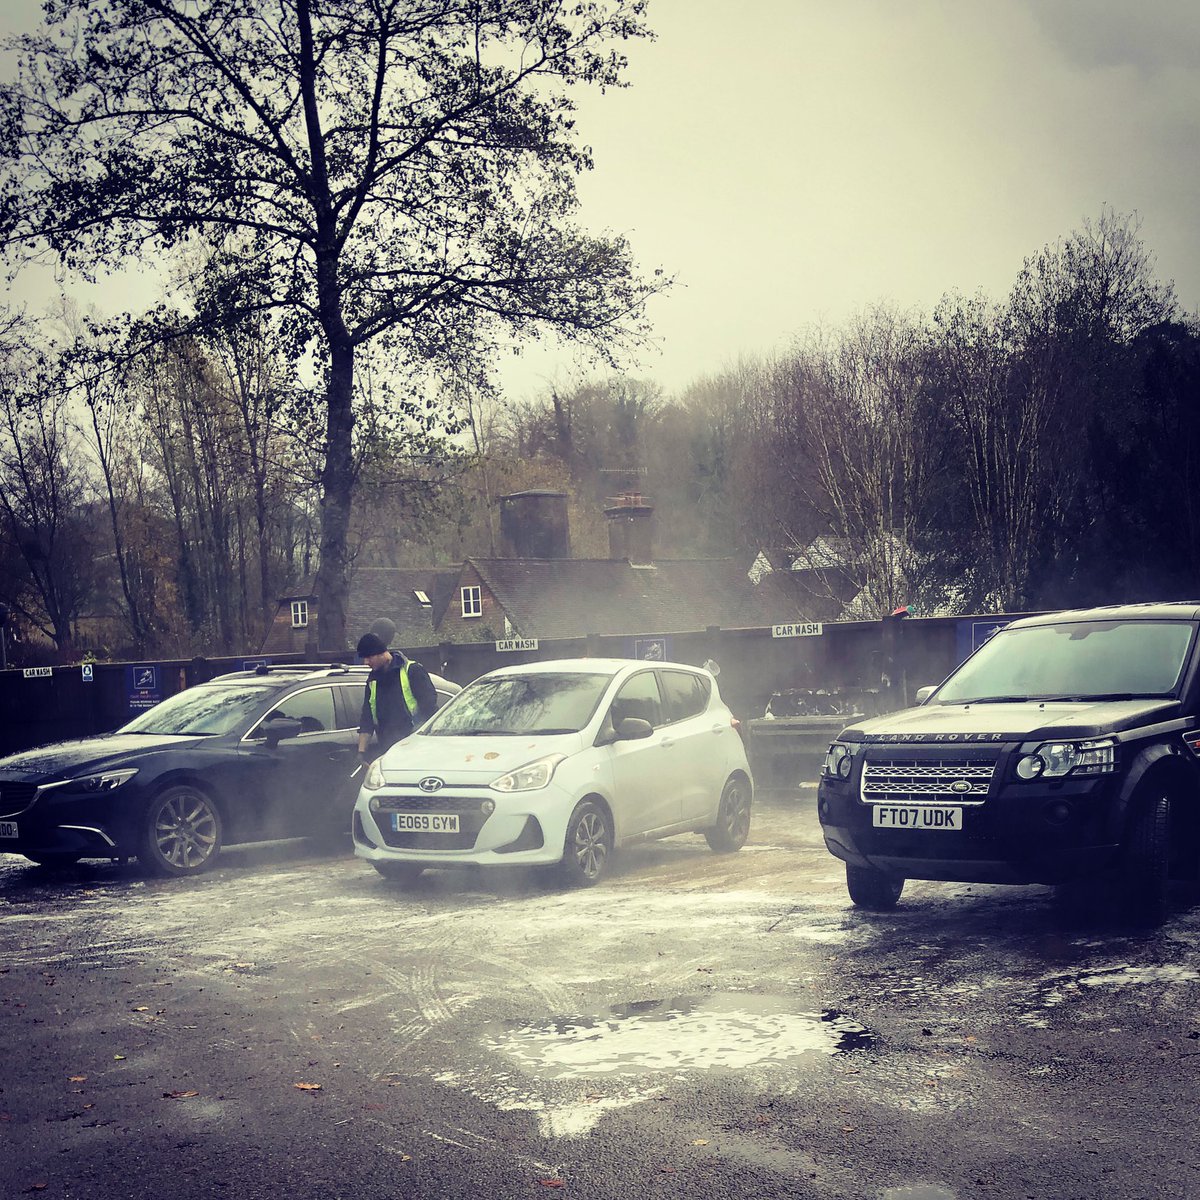 Love that the business closest to our house is the car wash #cleancarcleanmind #haslemere #surreylife #southdowns #surreyhills 🚙